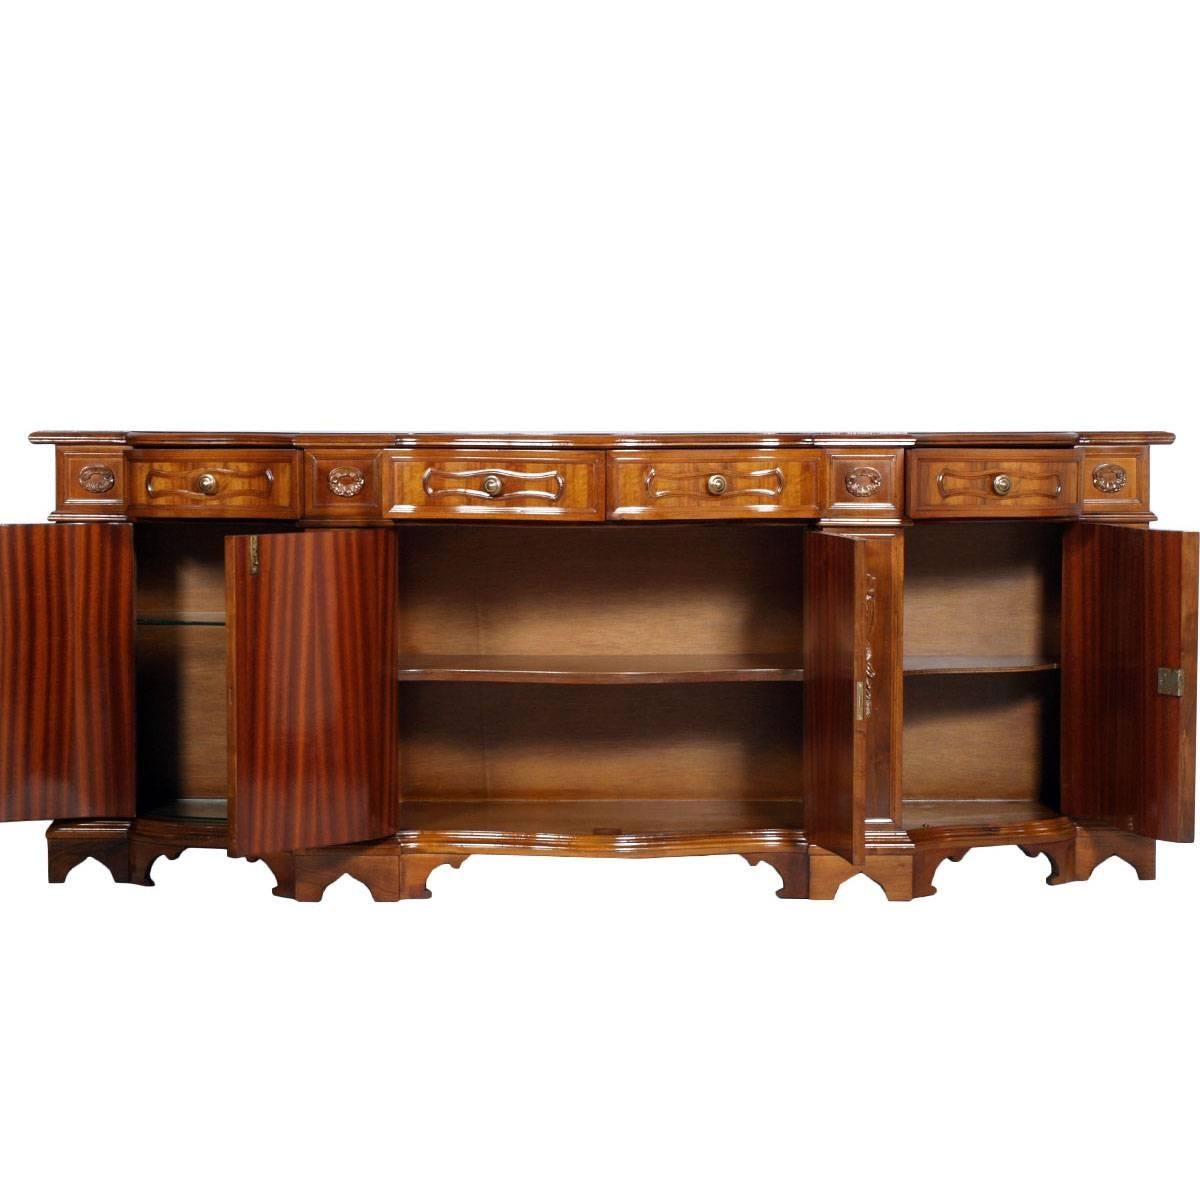 Big Venetian Renaissance credenza, Bassano's Ebanisteria, in walnut, carved walnut applications and with mahogany interiors, circa 1920s. Polished to wax.

Measures cm: H 93 x W 234 x D 47.